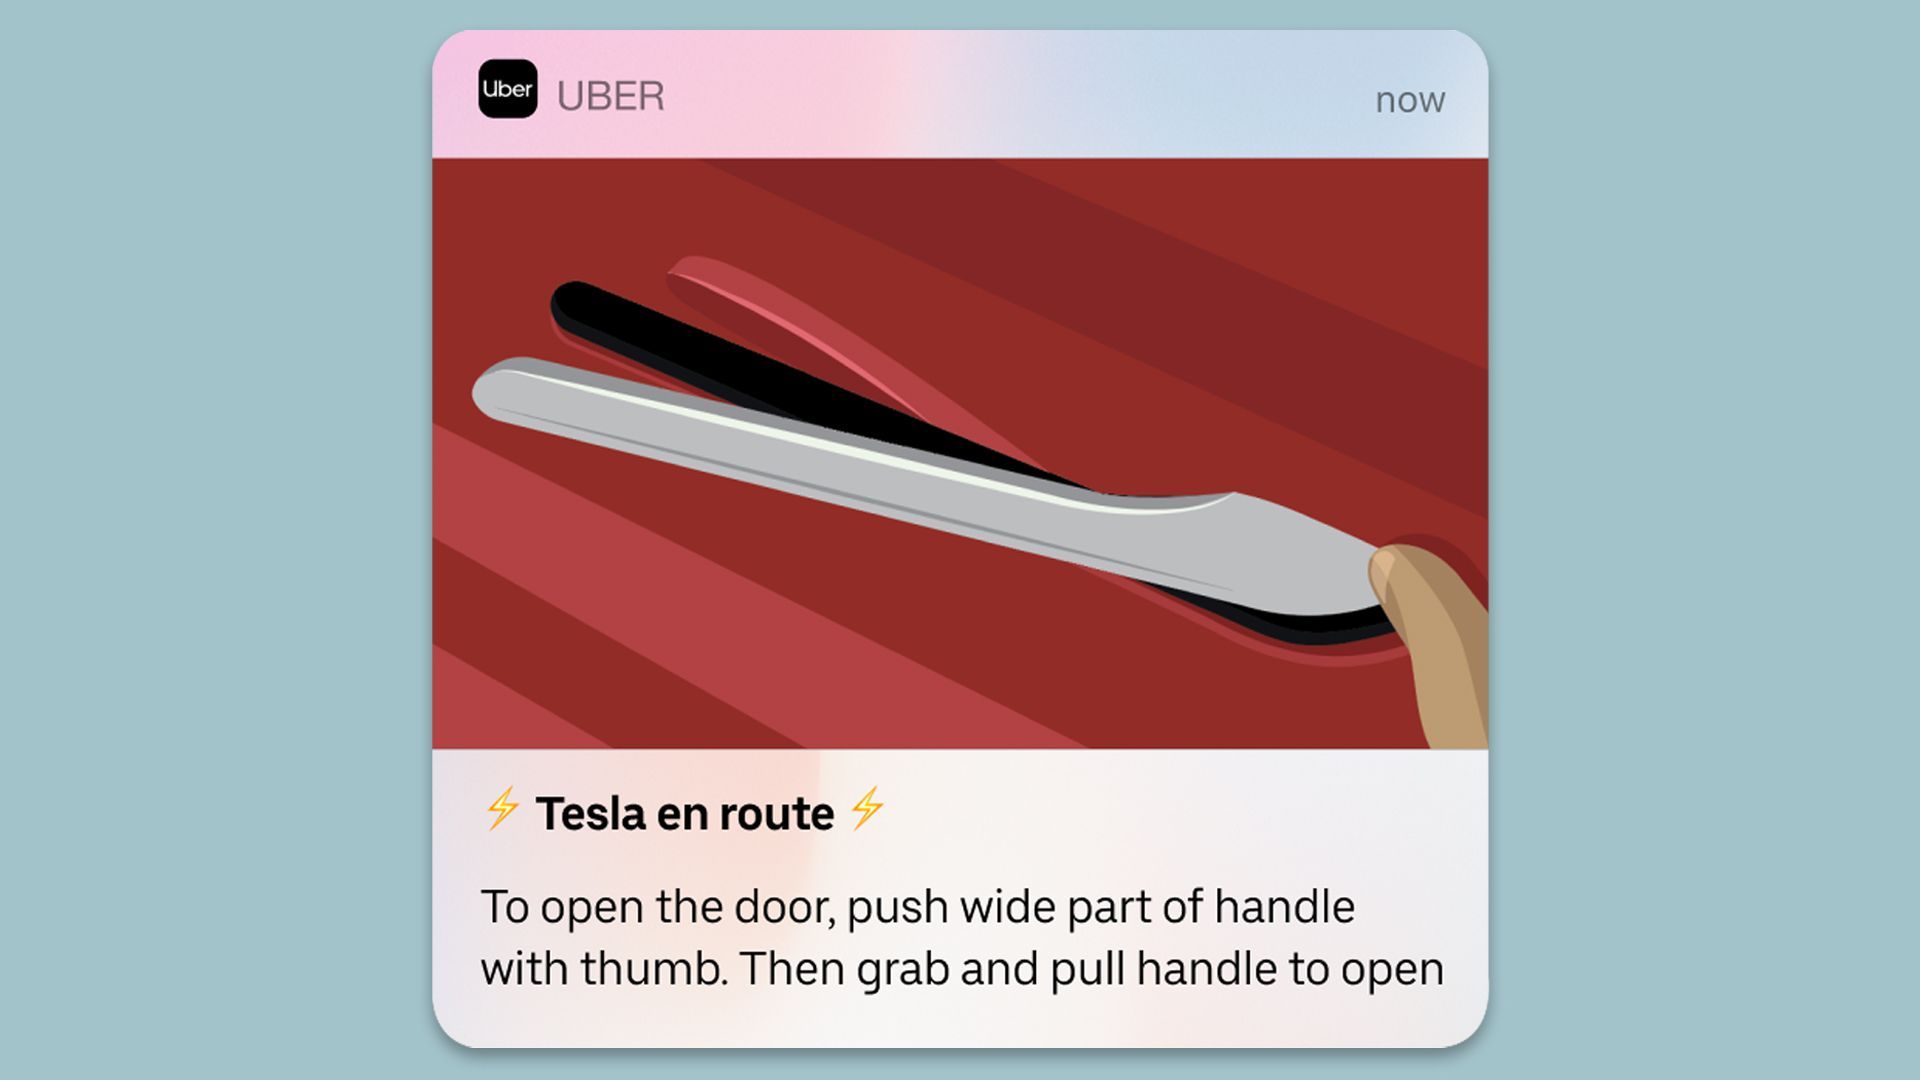 Some Uber riders are befuddled about how to get into a Tesla. Image: Uber